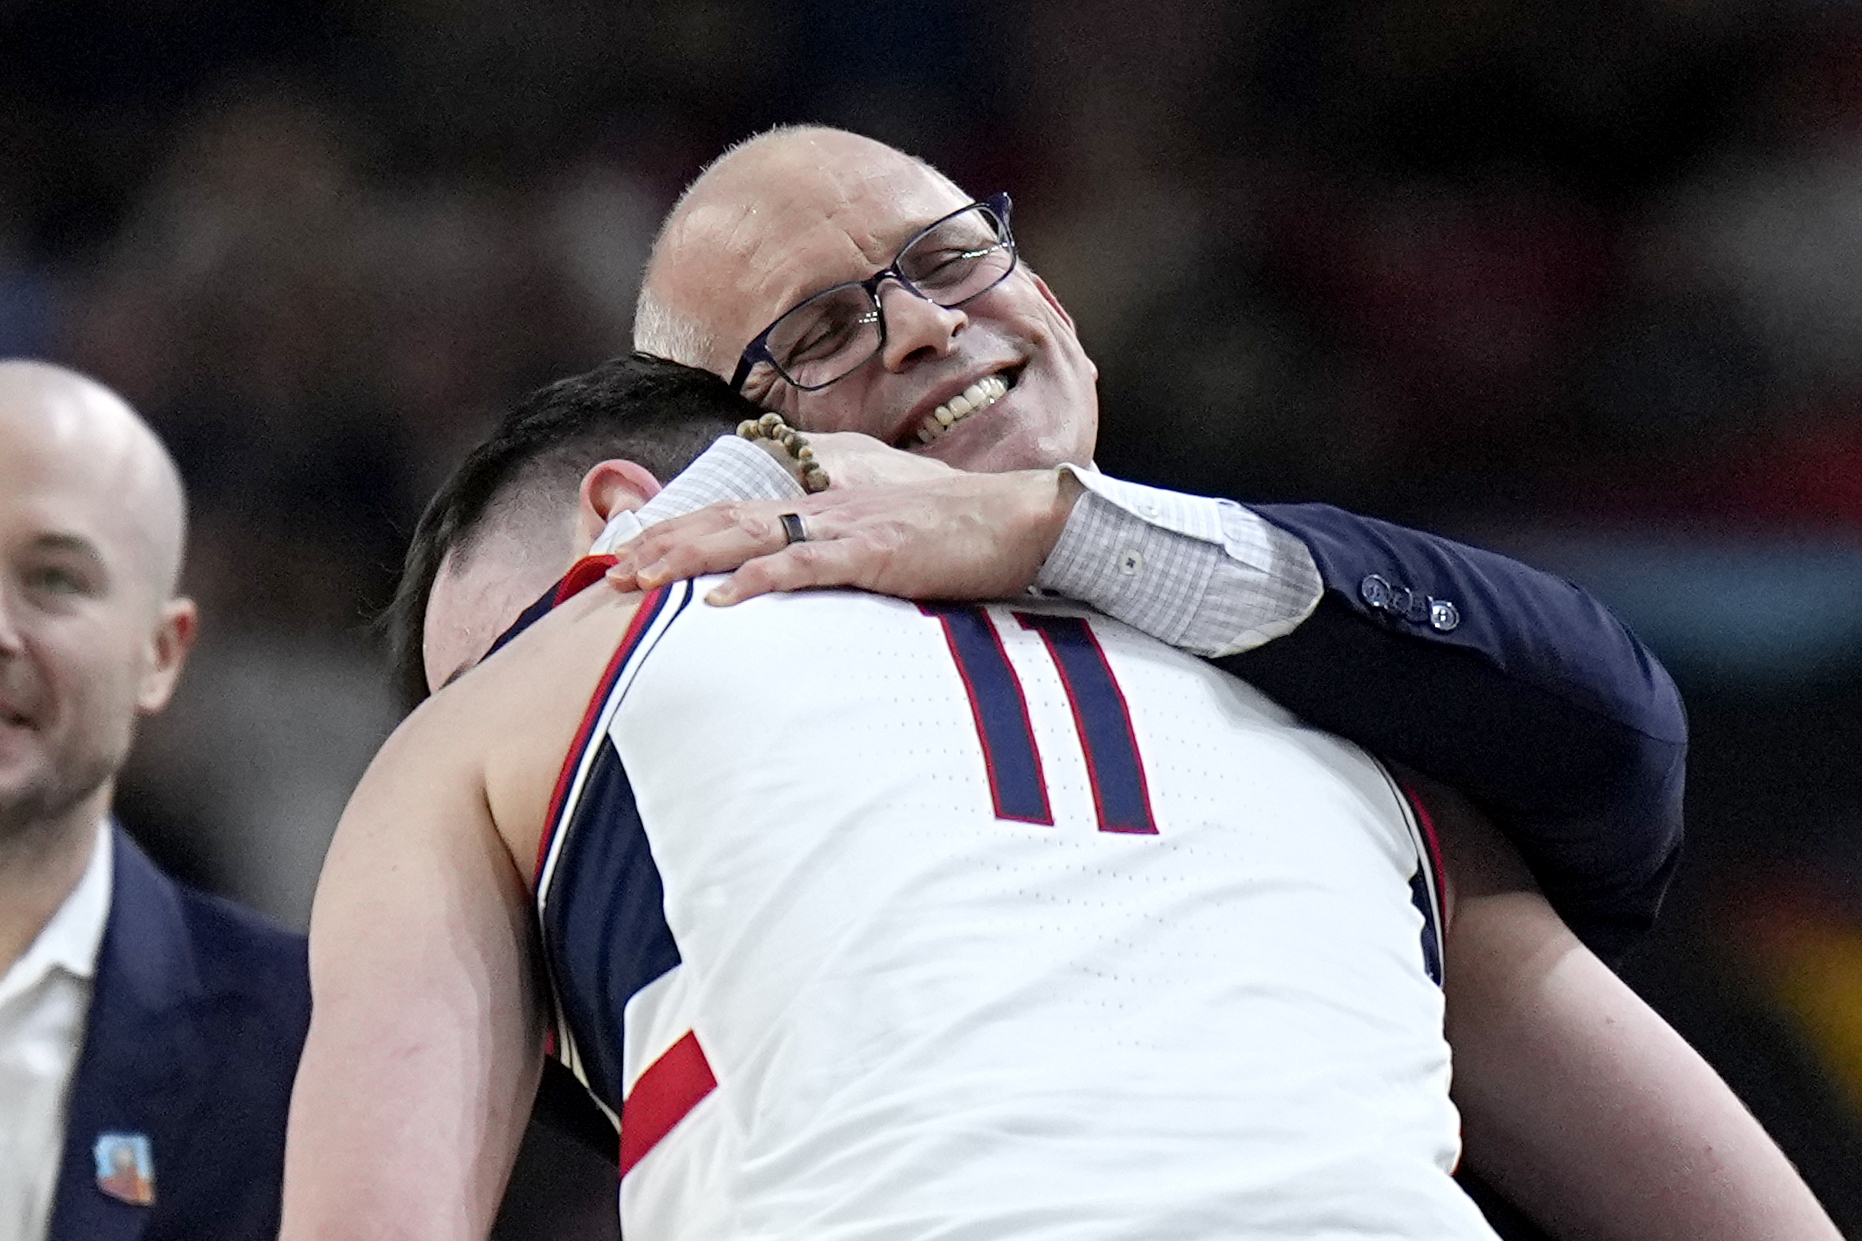 Lakers' Dan Hurley deal could top $100 million. He may stay at UConn